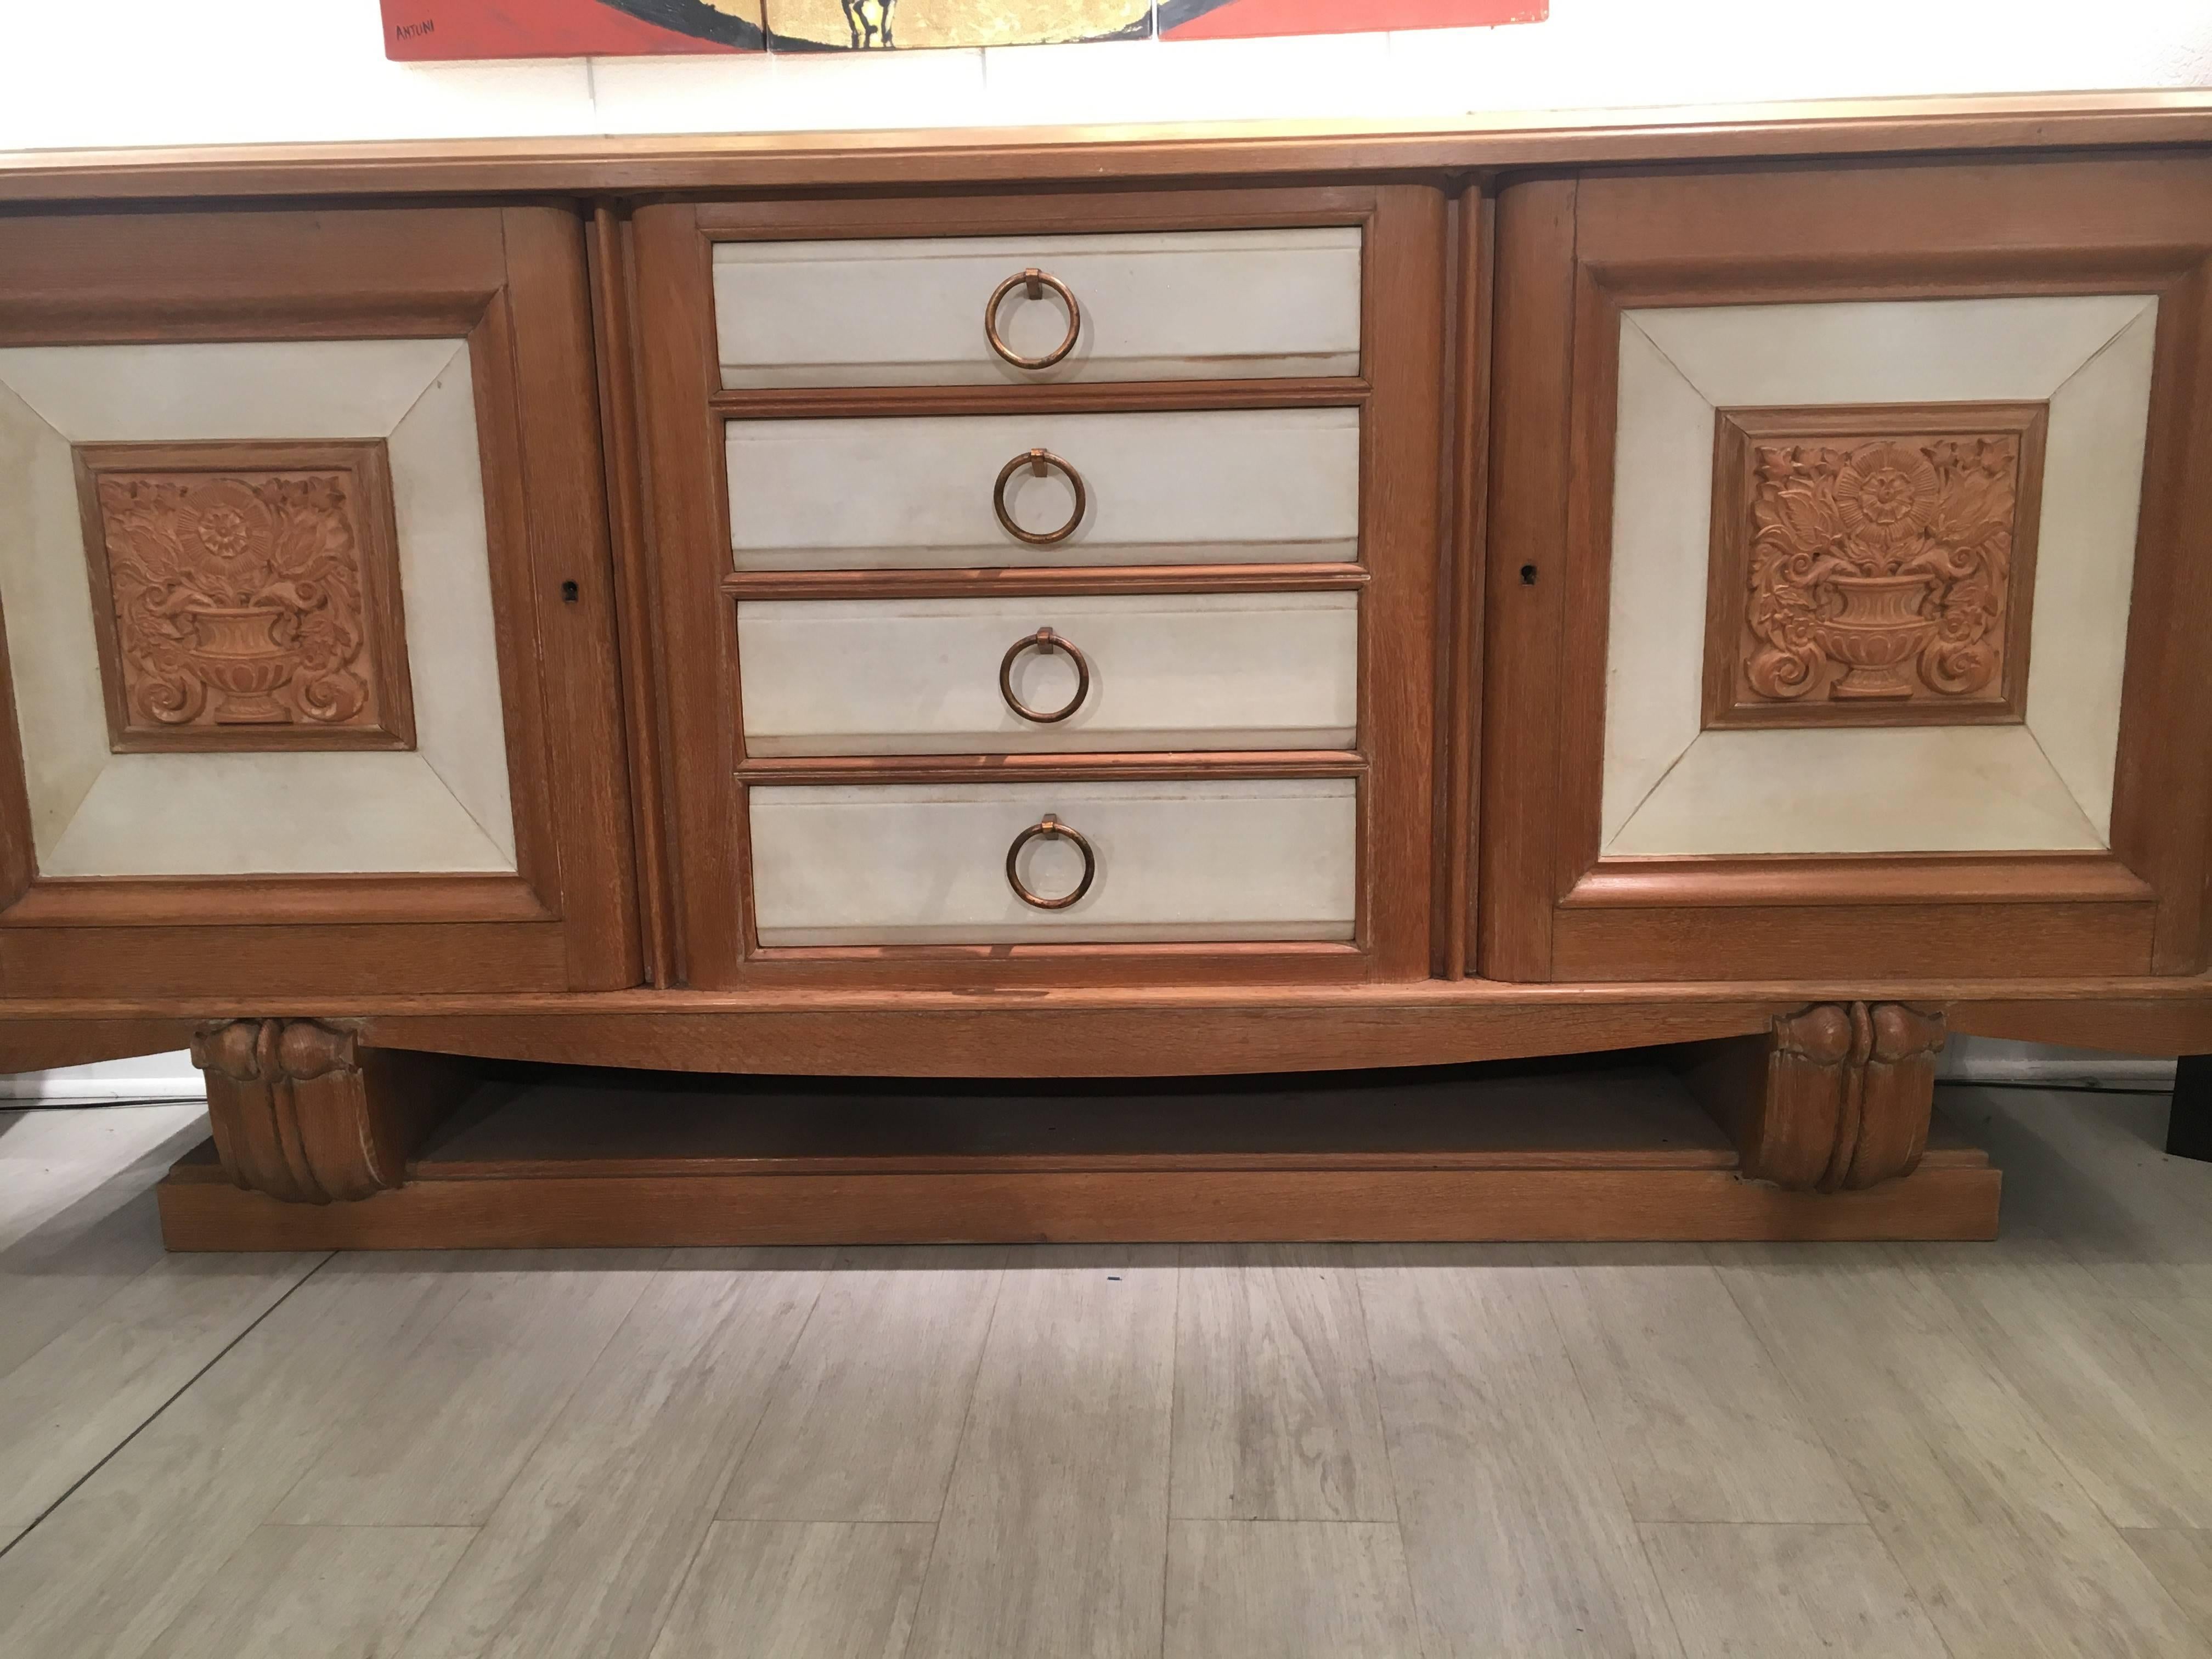 Rare console sideboard, 1940
Awarded to André Arbus
Solid light oak
The top, doors and drawers are covered with original stingray.
Both doors have a square medallion in carved oak.
Superb original condition
Measures: 206 x 53 x 100 cm.